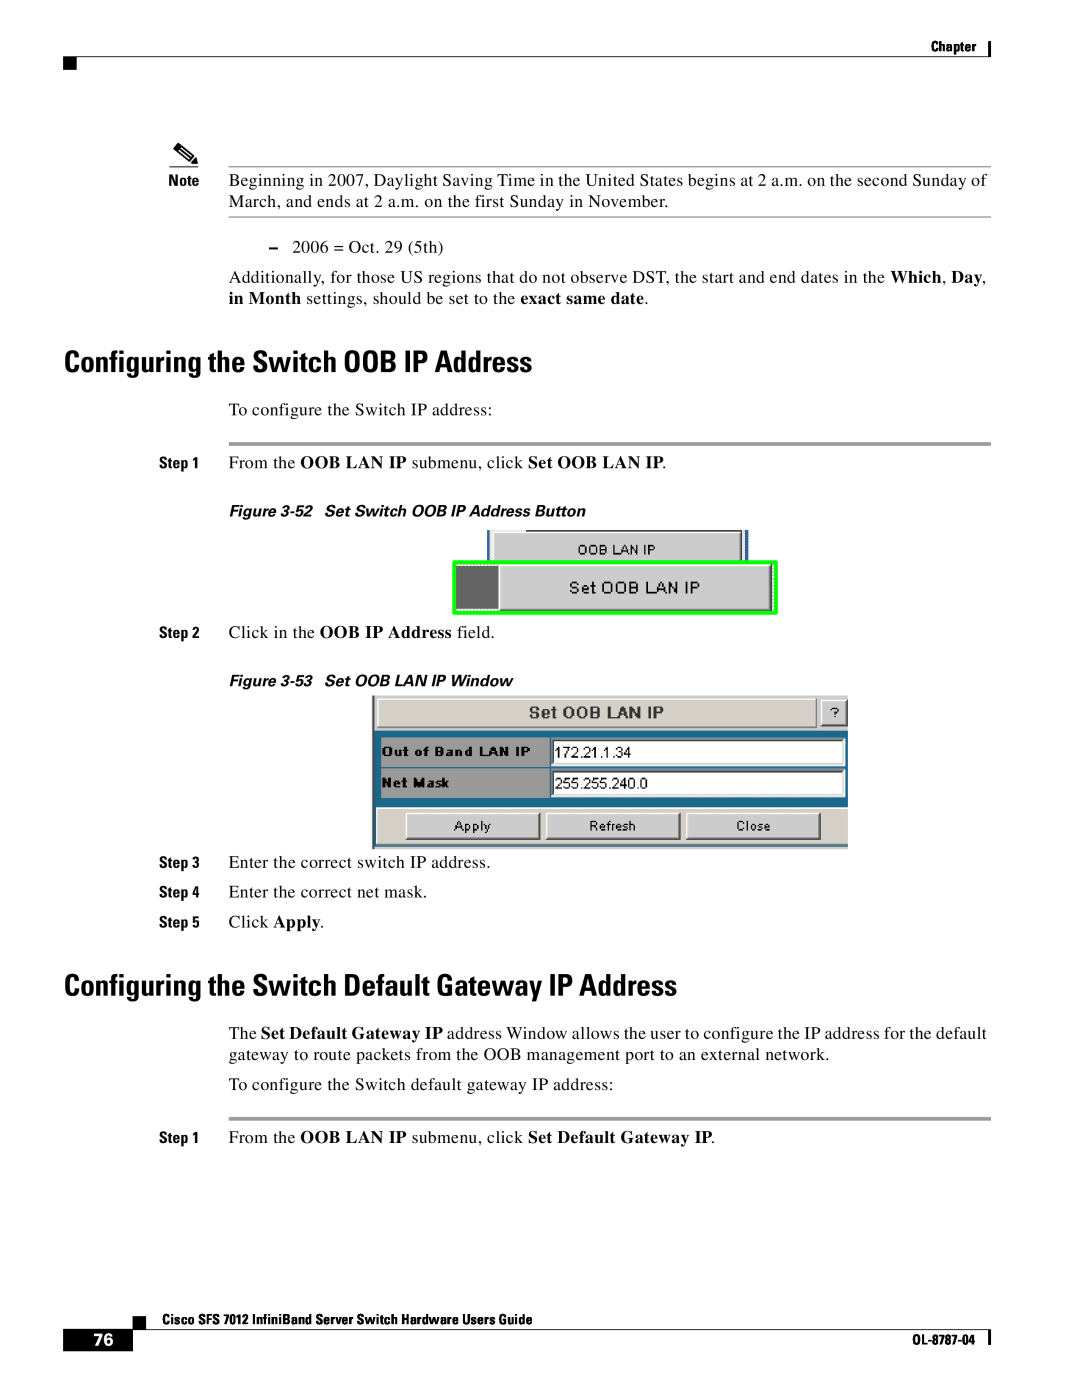 Cisco Systems SFS 7012 manual Configuring the Switch OOB IP Address, Configuring the Switch Default Gateway IP Address 